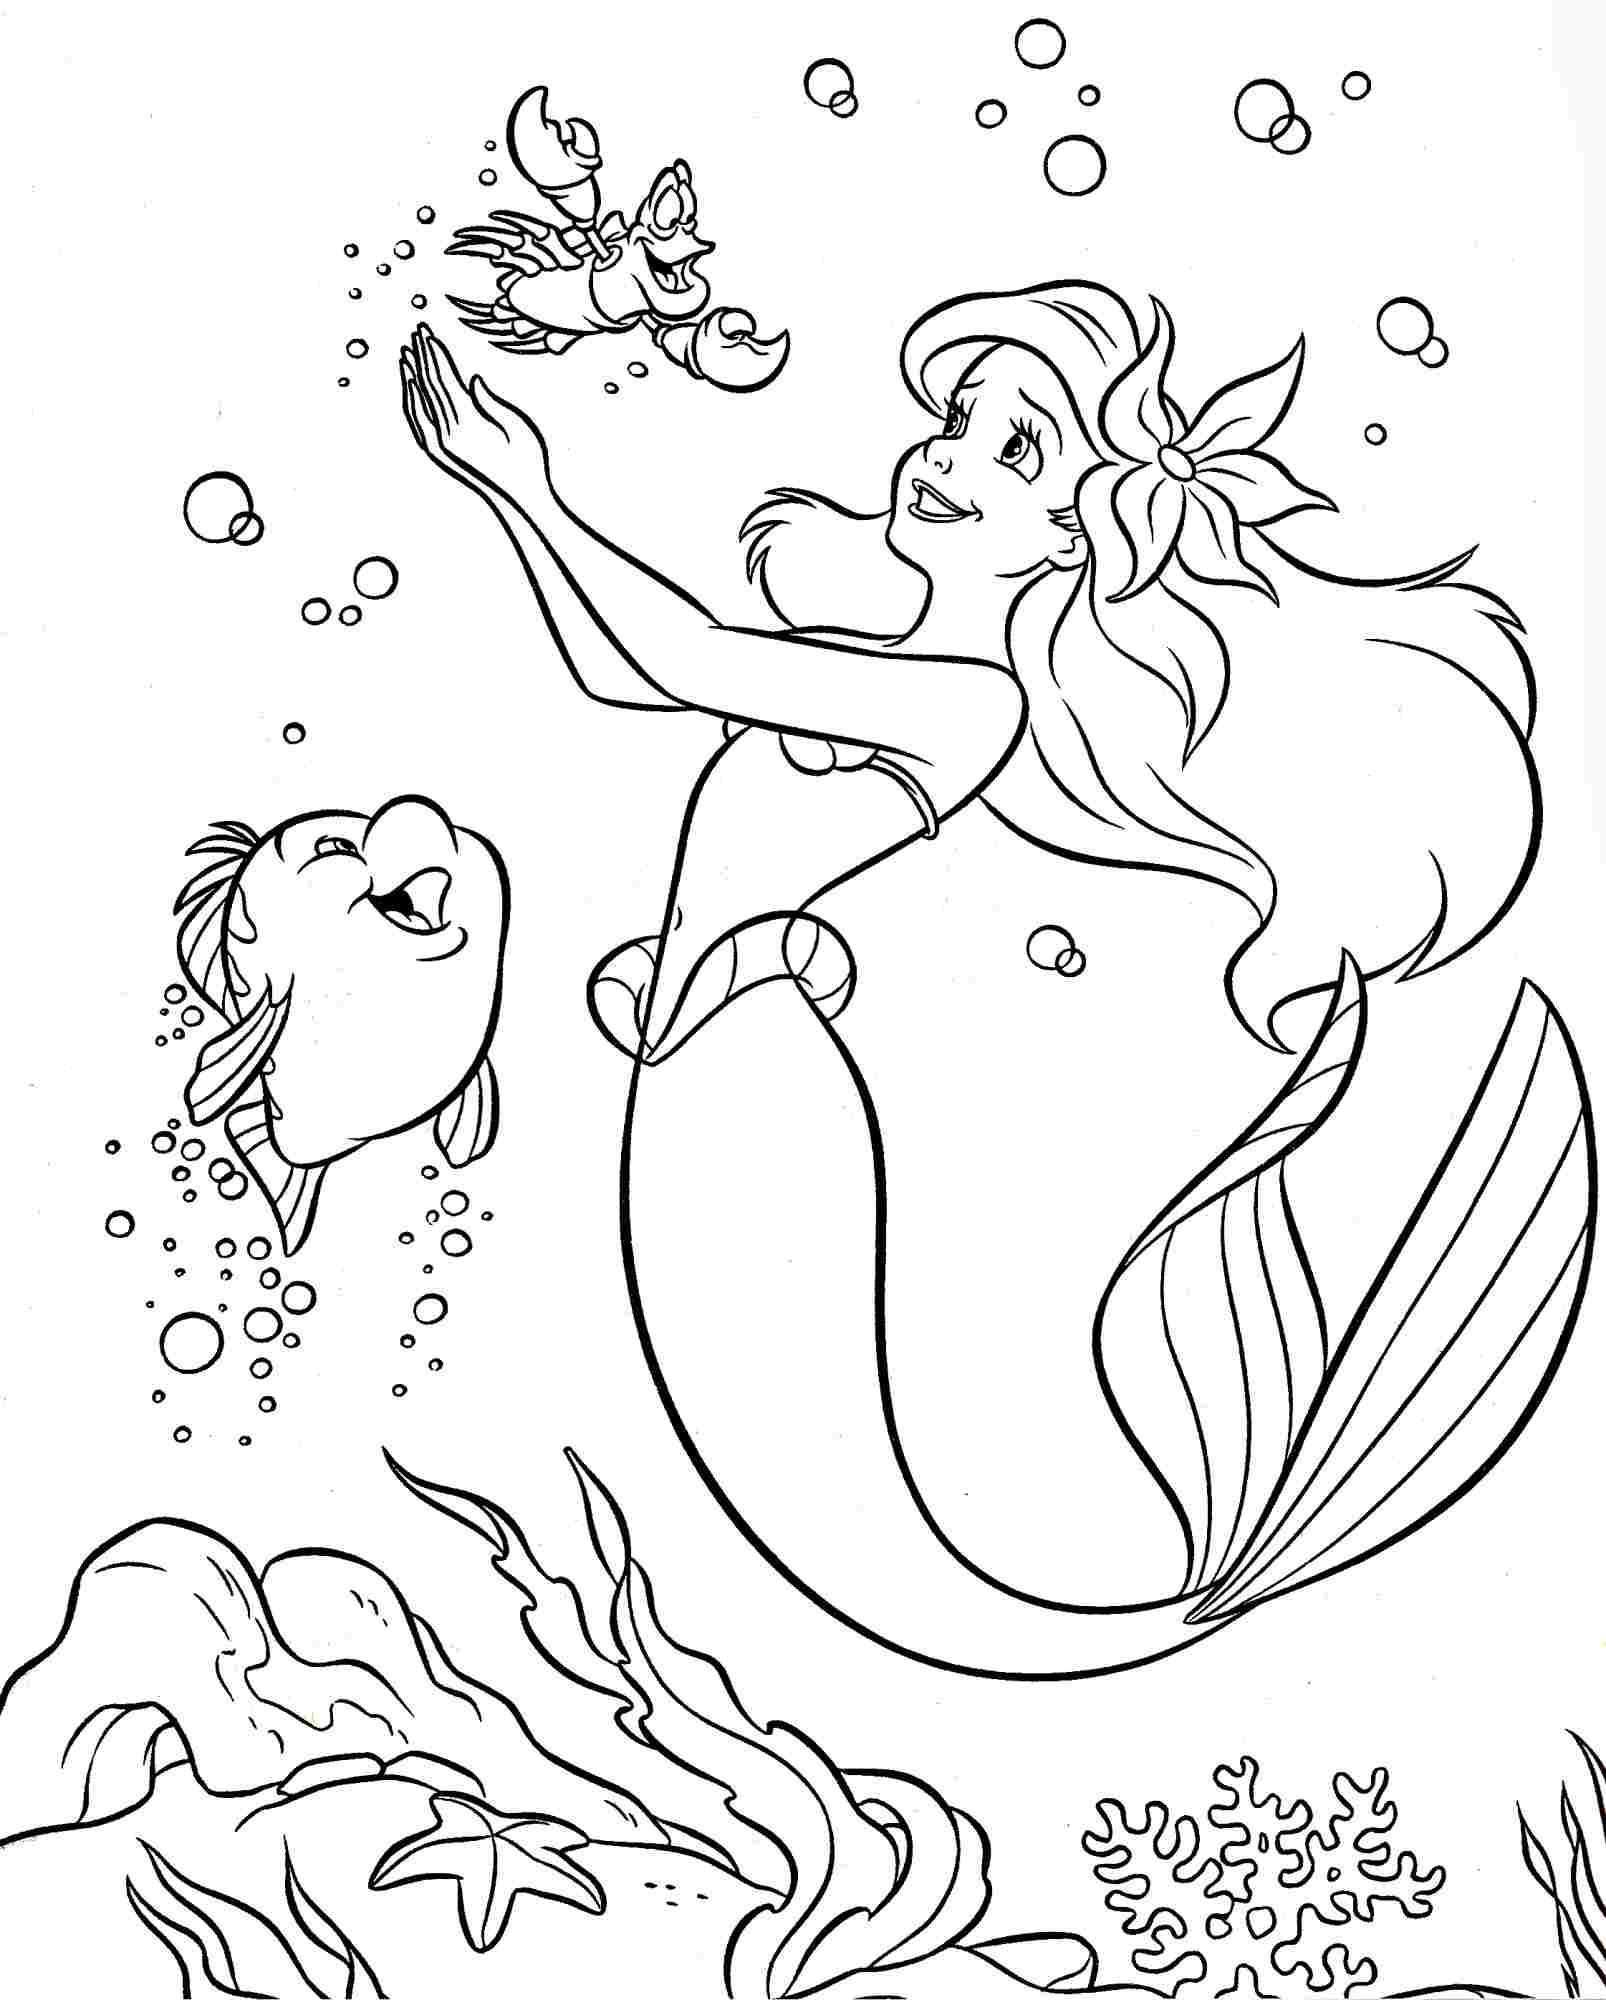 Colouring Pages Coloring Pages Disney Princess Little Mermaid Ariel For Kids Free Pri